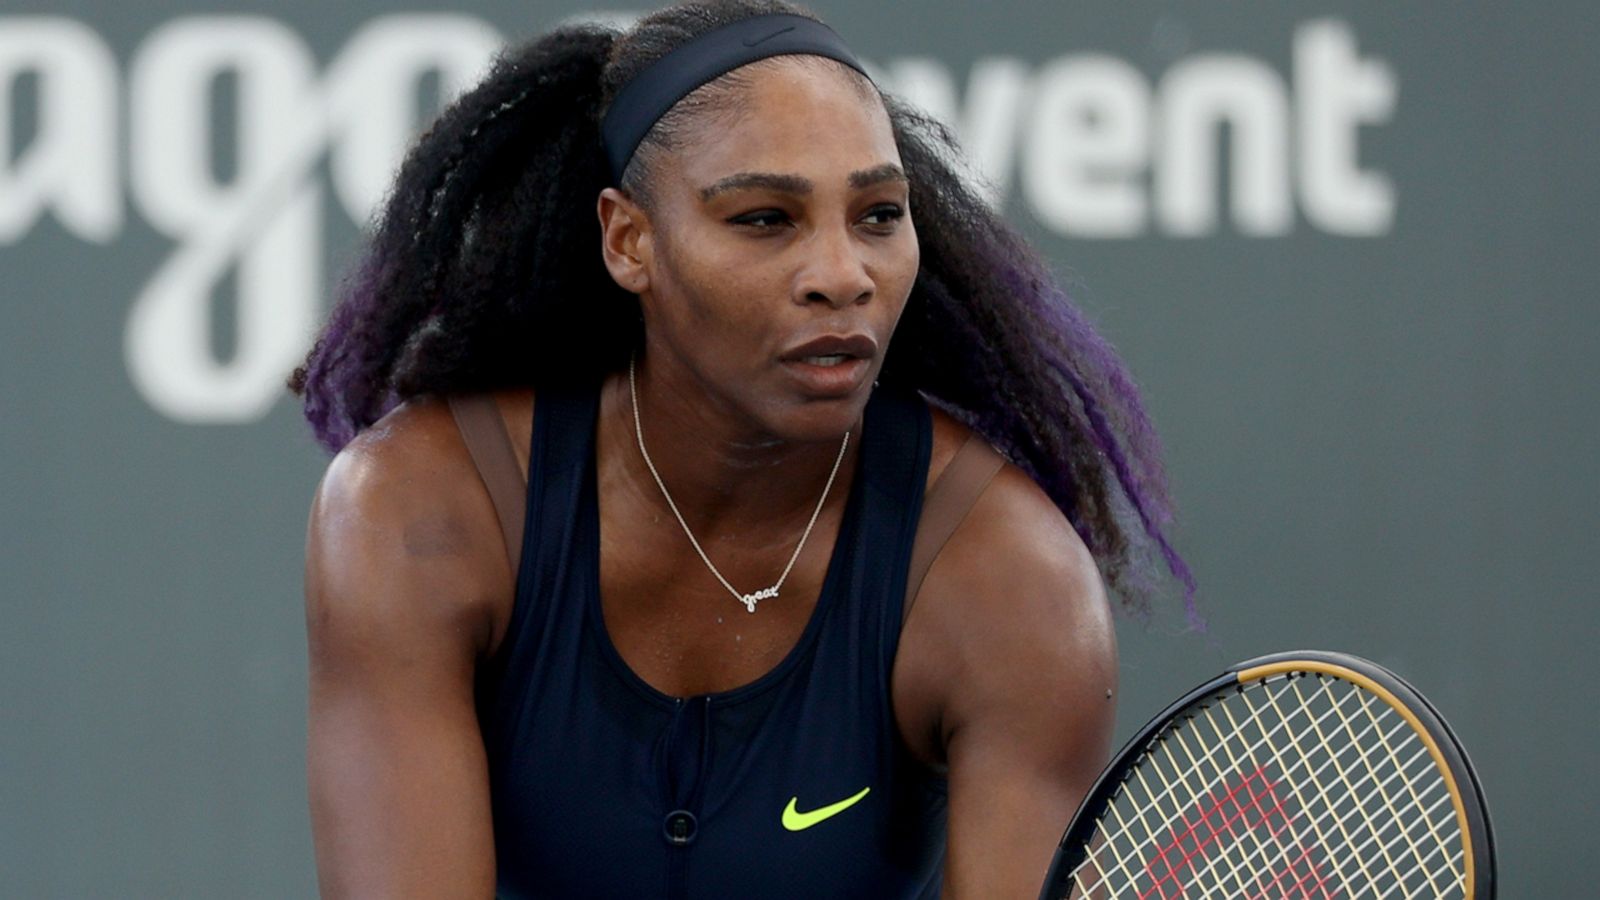 Serena Williams on going for gold, body confidence and being a